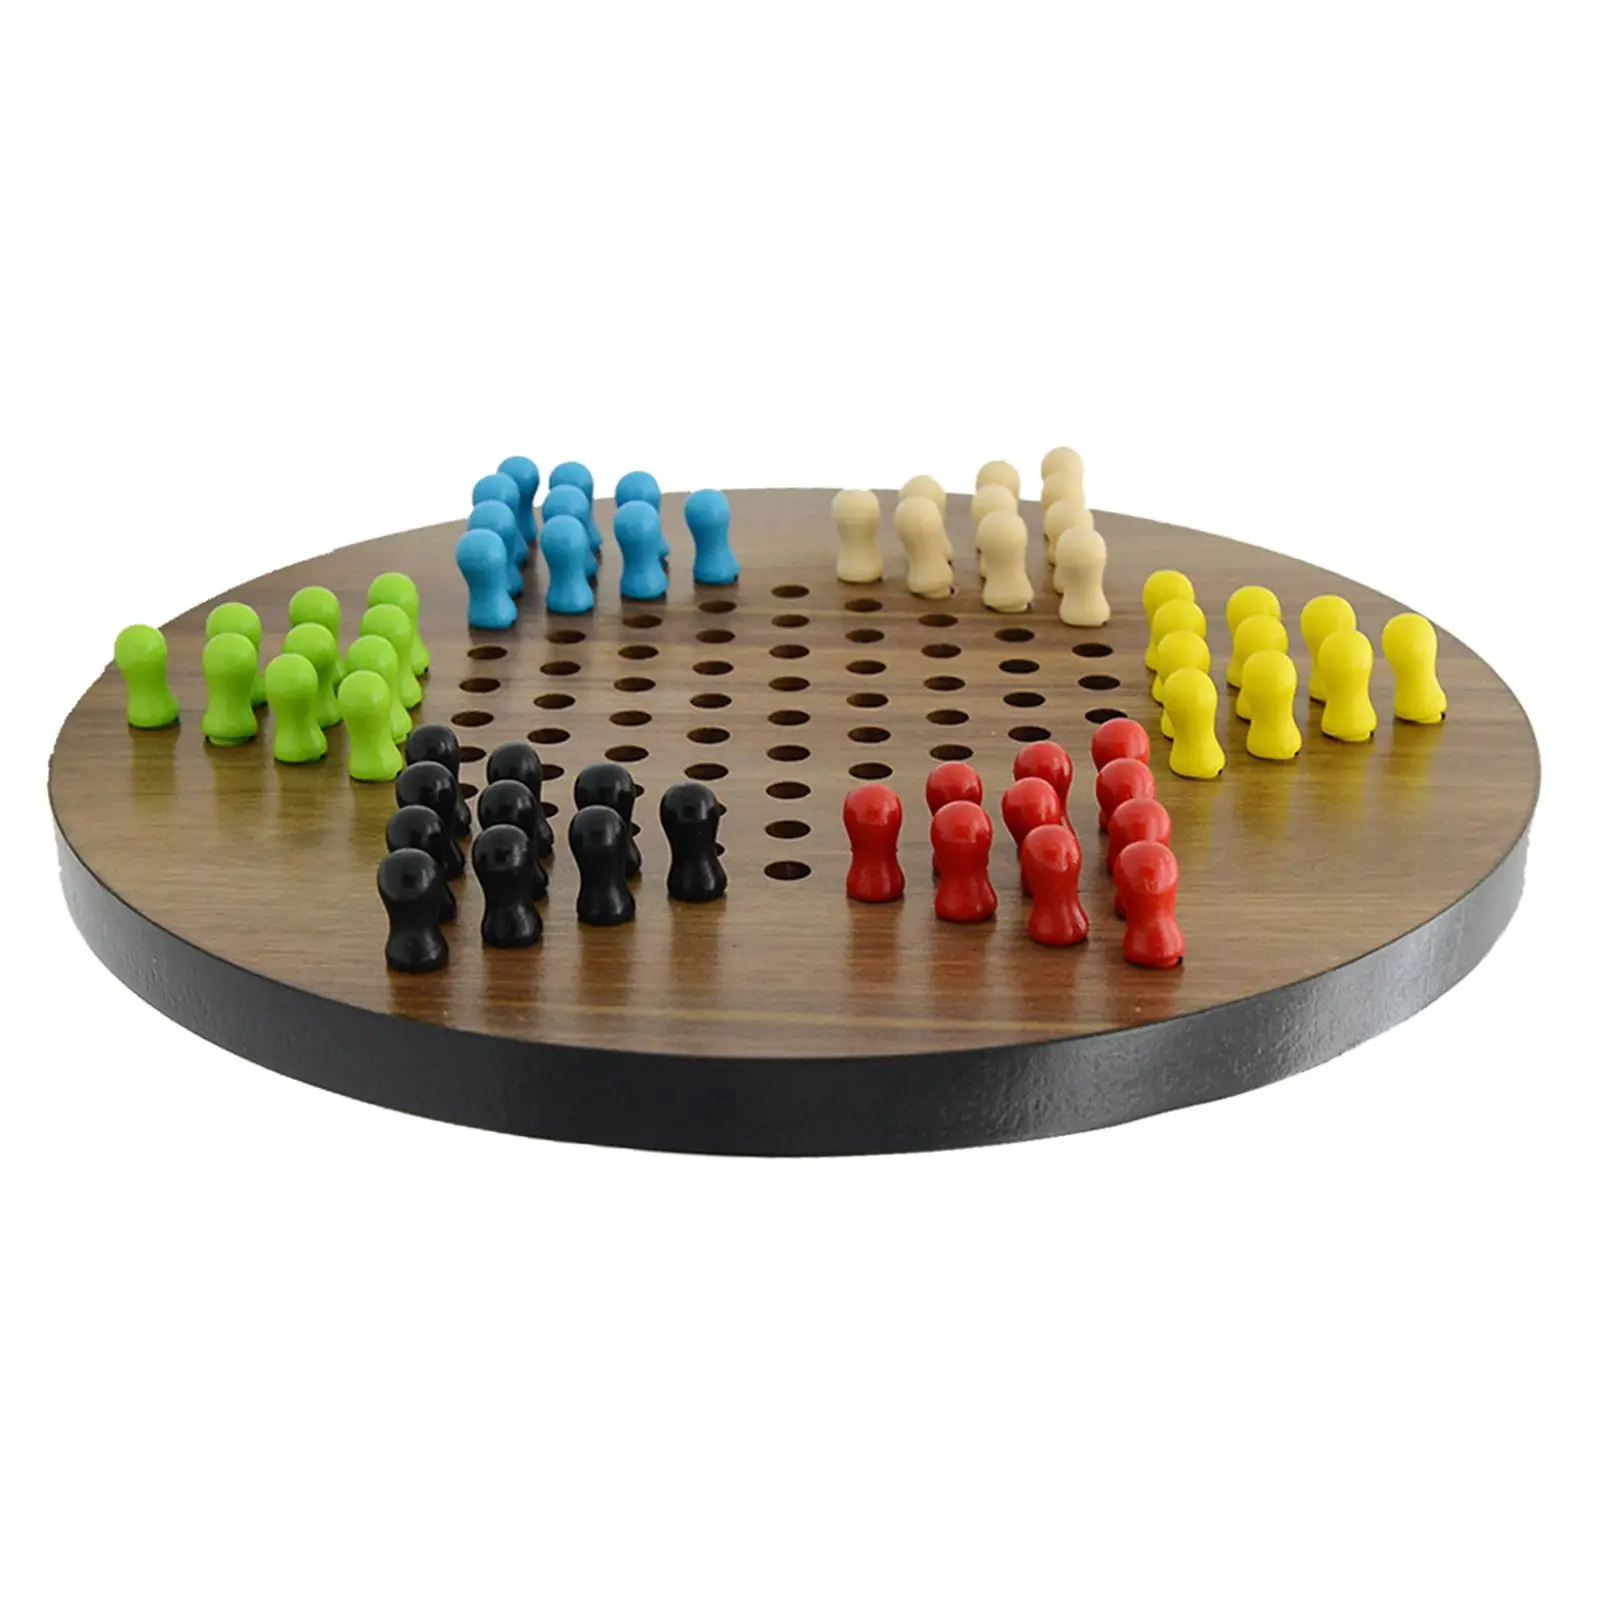 Chinese Checkers Game Includes 60 Colorful Wooden Board Game Chinese Checkers with Marbles for Preschool Children Kids Toddler